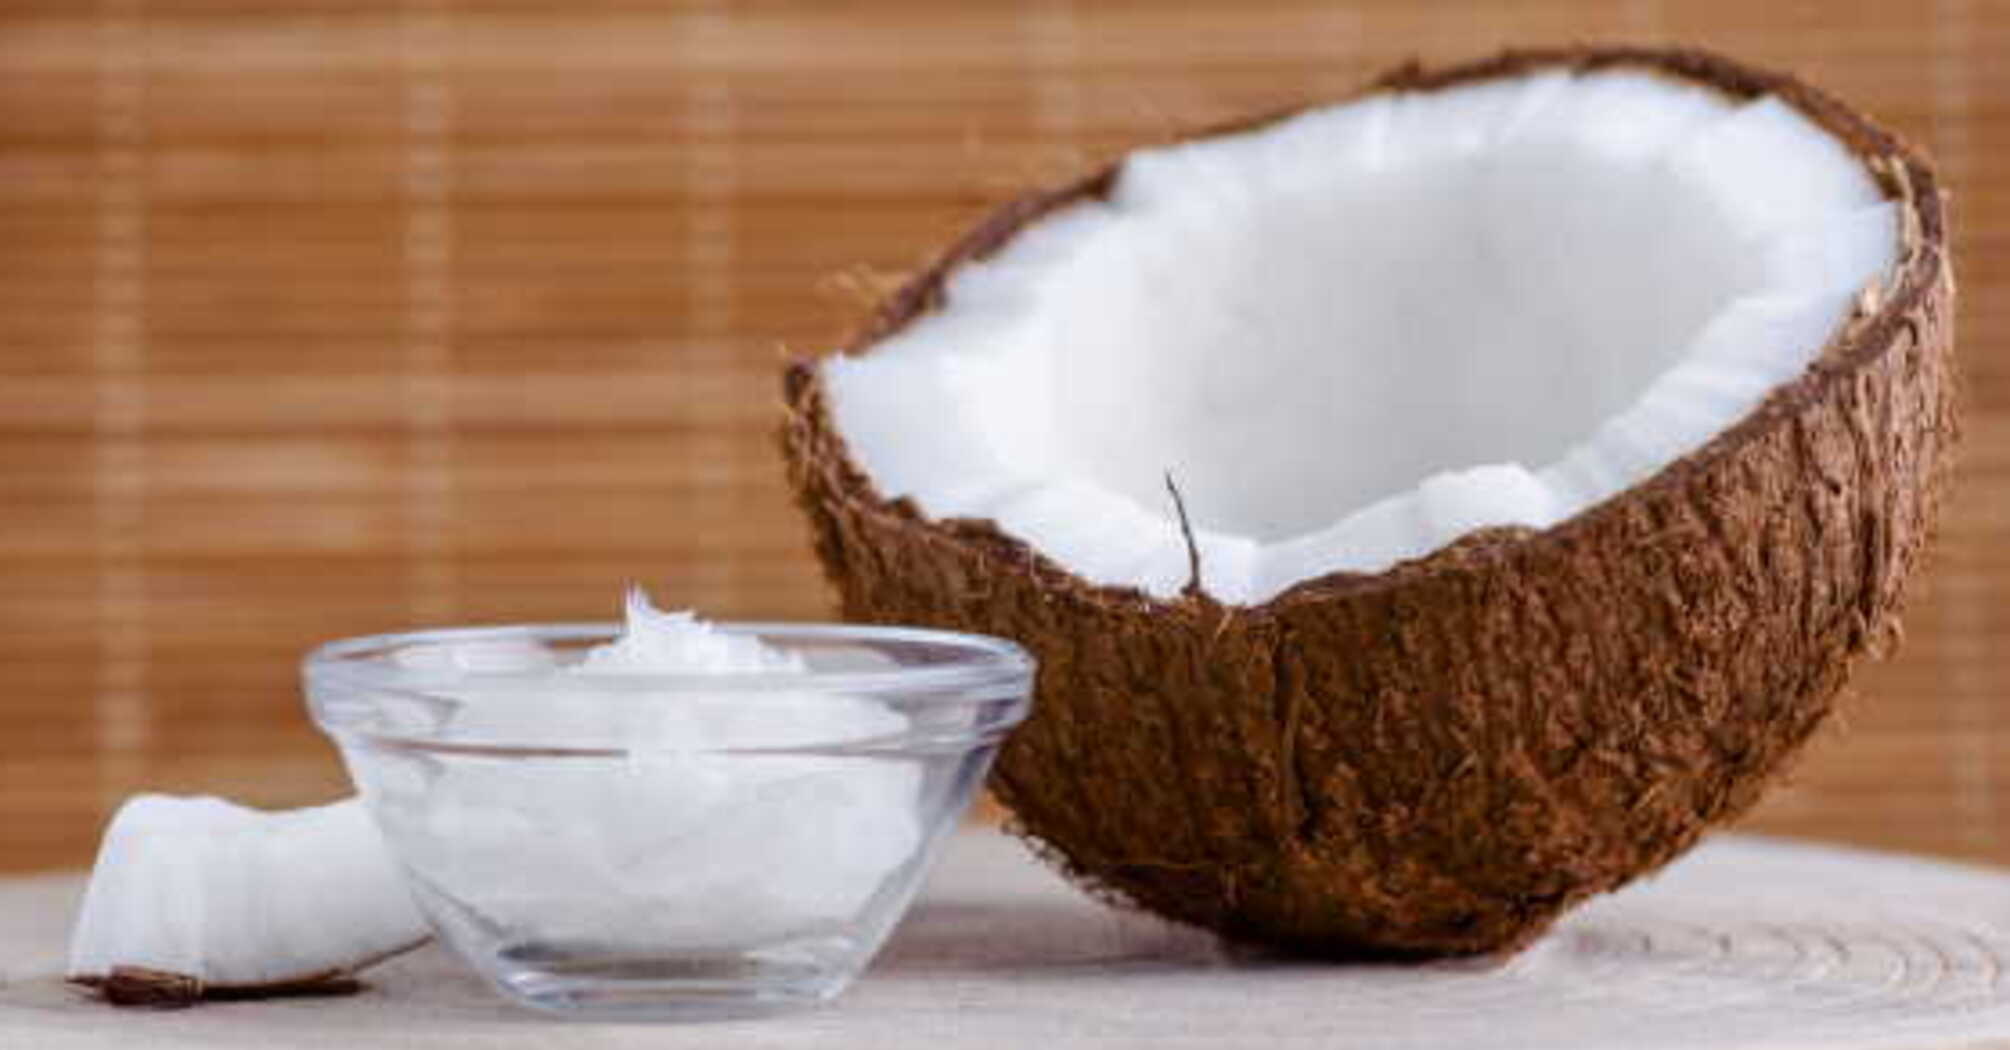 Advantages and disadvantages of coconut oil